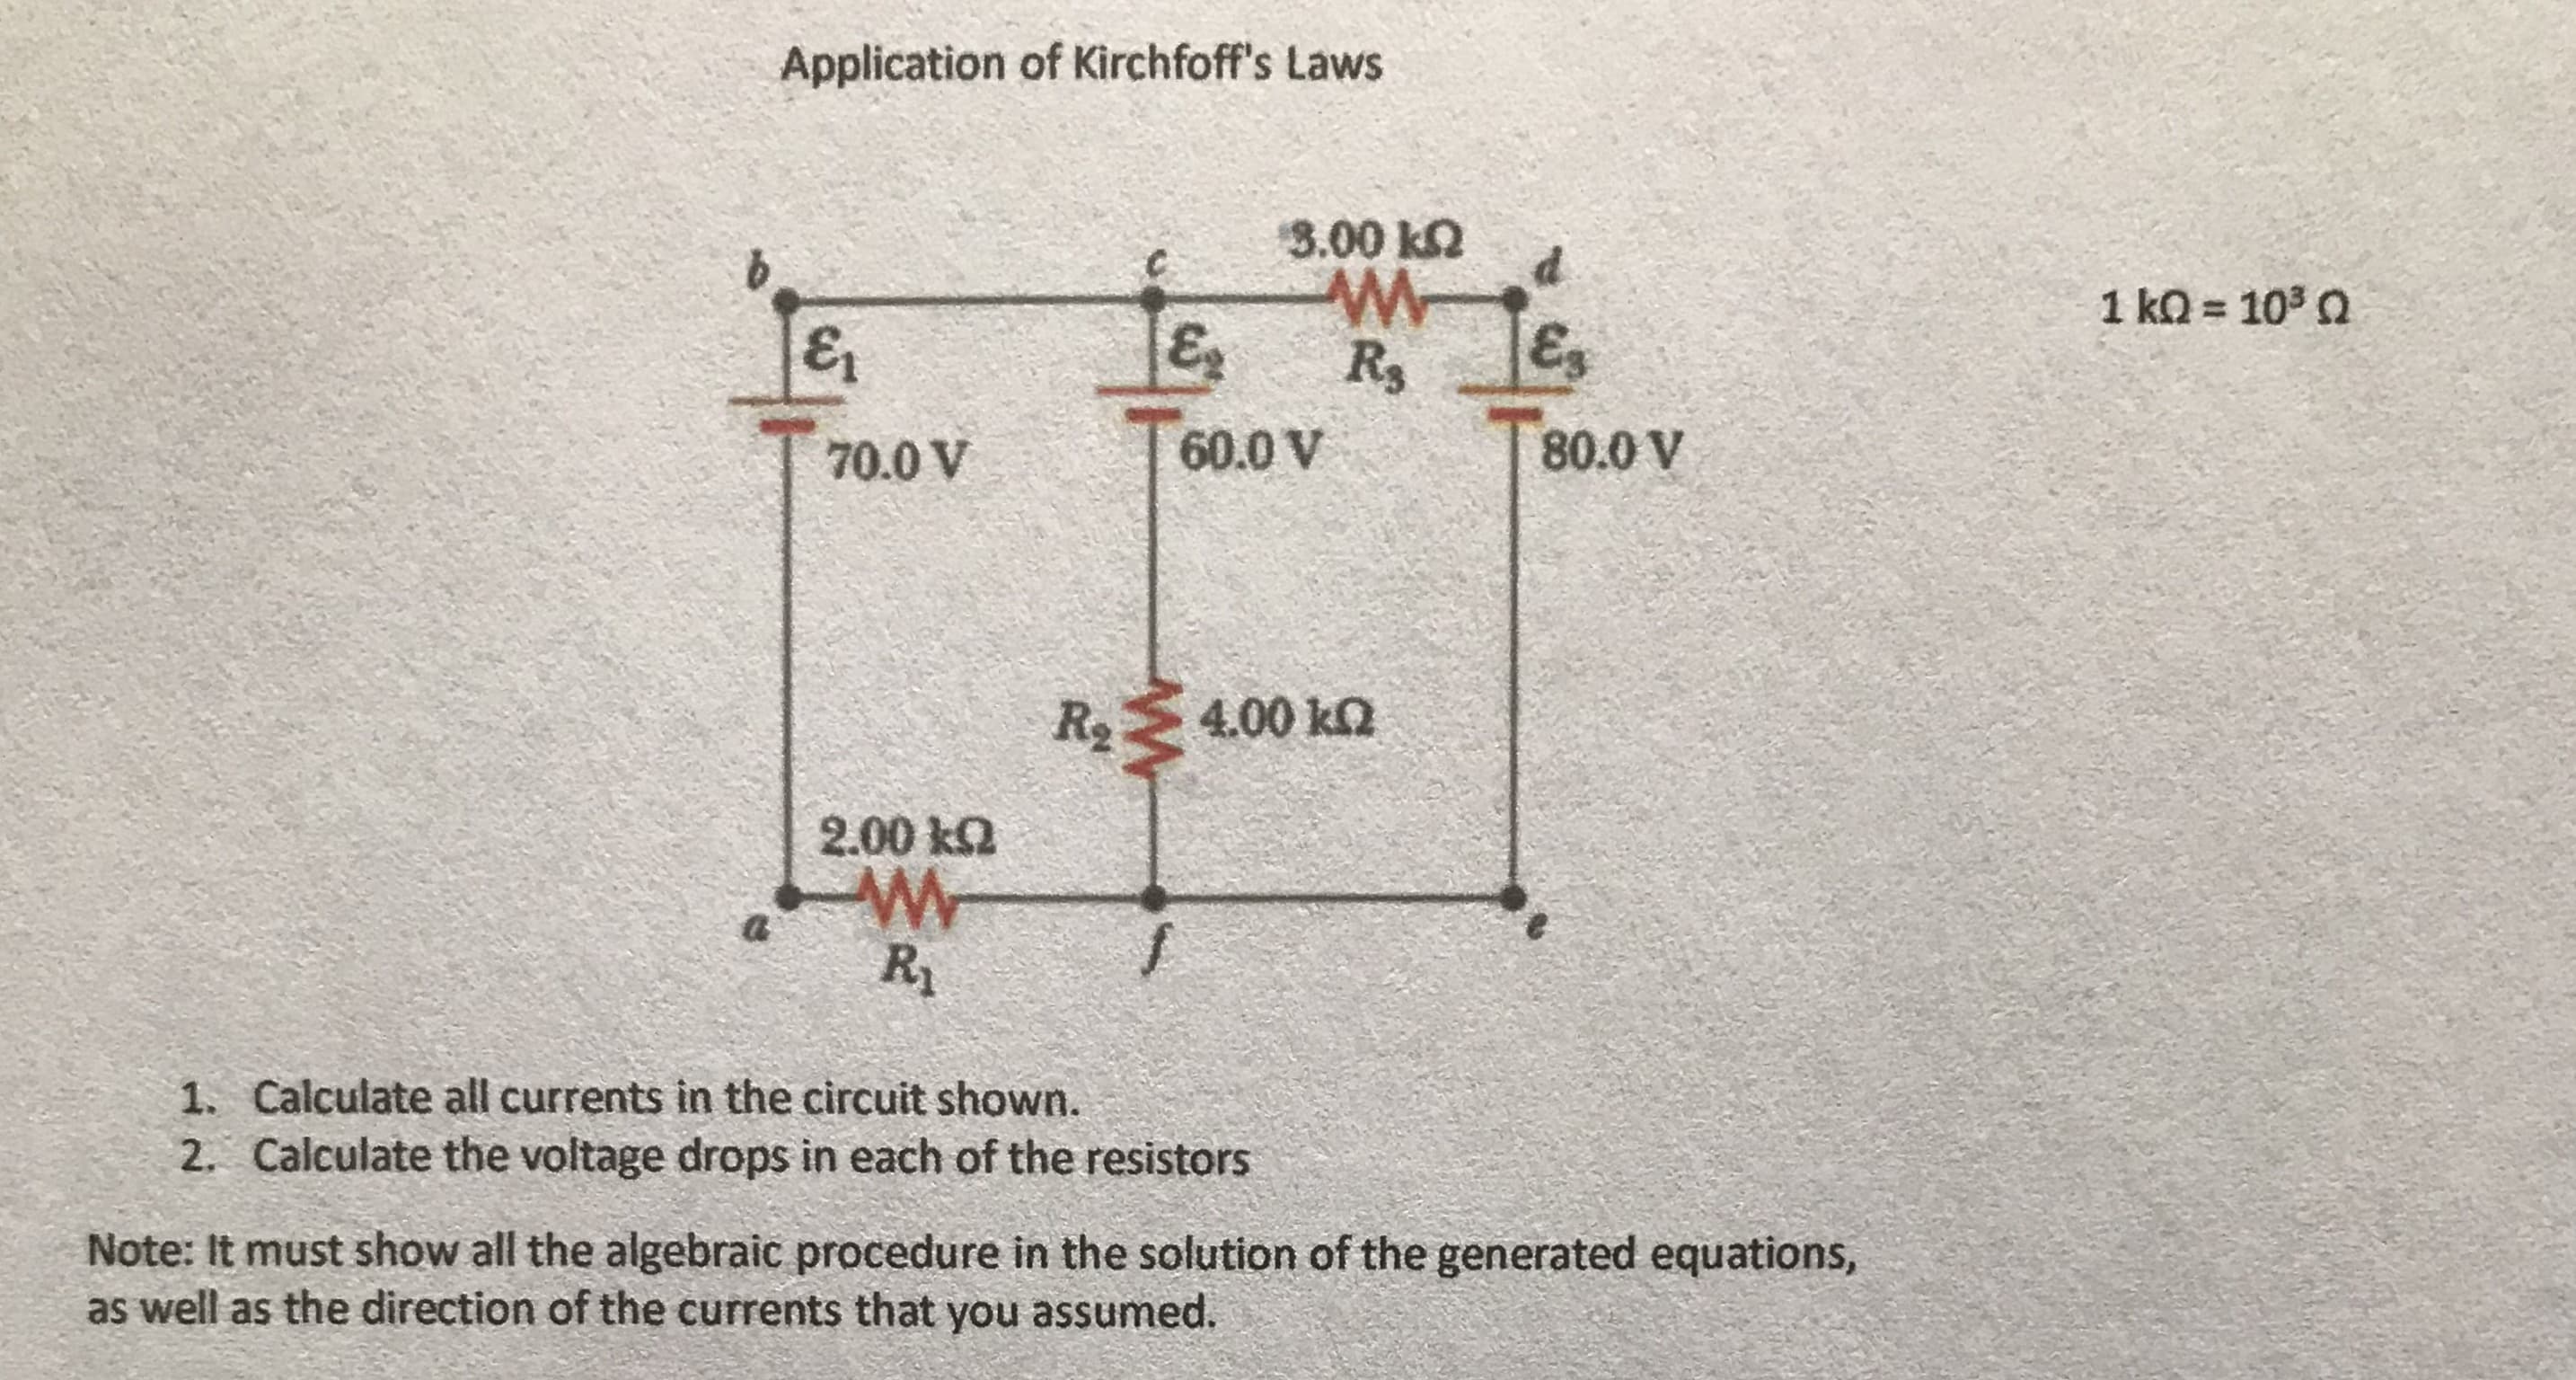 3.00 k2
1 kQ = 103 0
E
R3
Es
70.0 V
60.0 V
T80.0 V
R2
4.00 ka
2.00 ka
R
1. Calculate all currents in the circuit shown.
2. Calculate the voltage drops in each of the resistors
